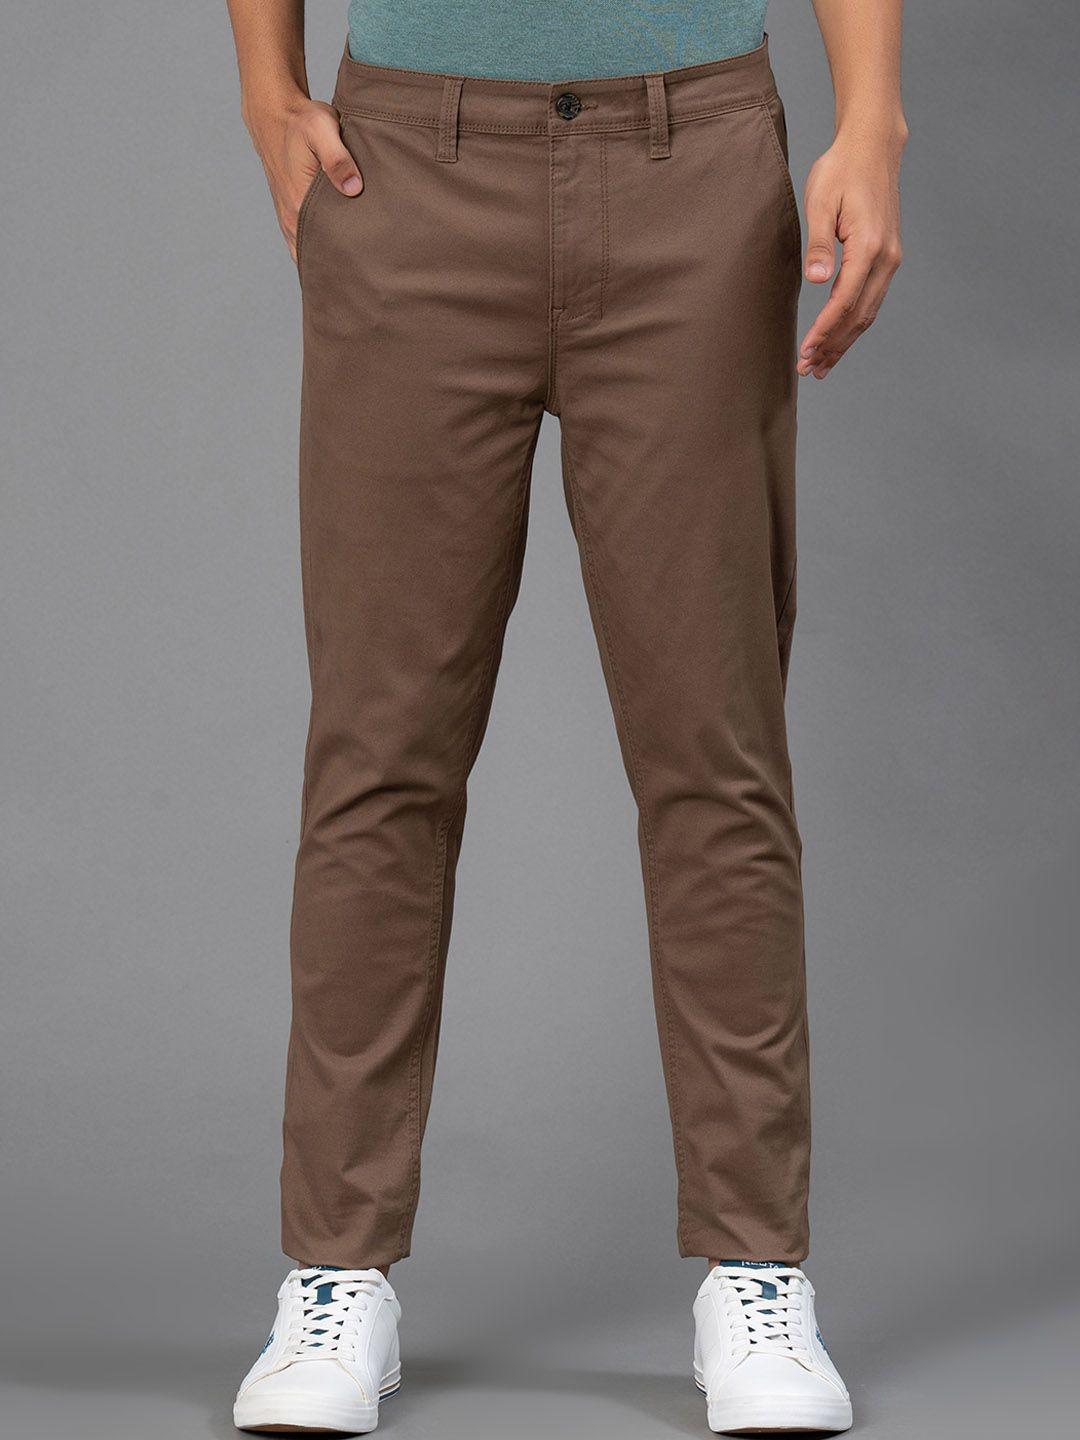 red tape men mid-rise skinny fit trousers